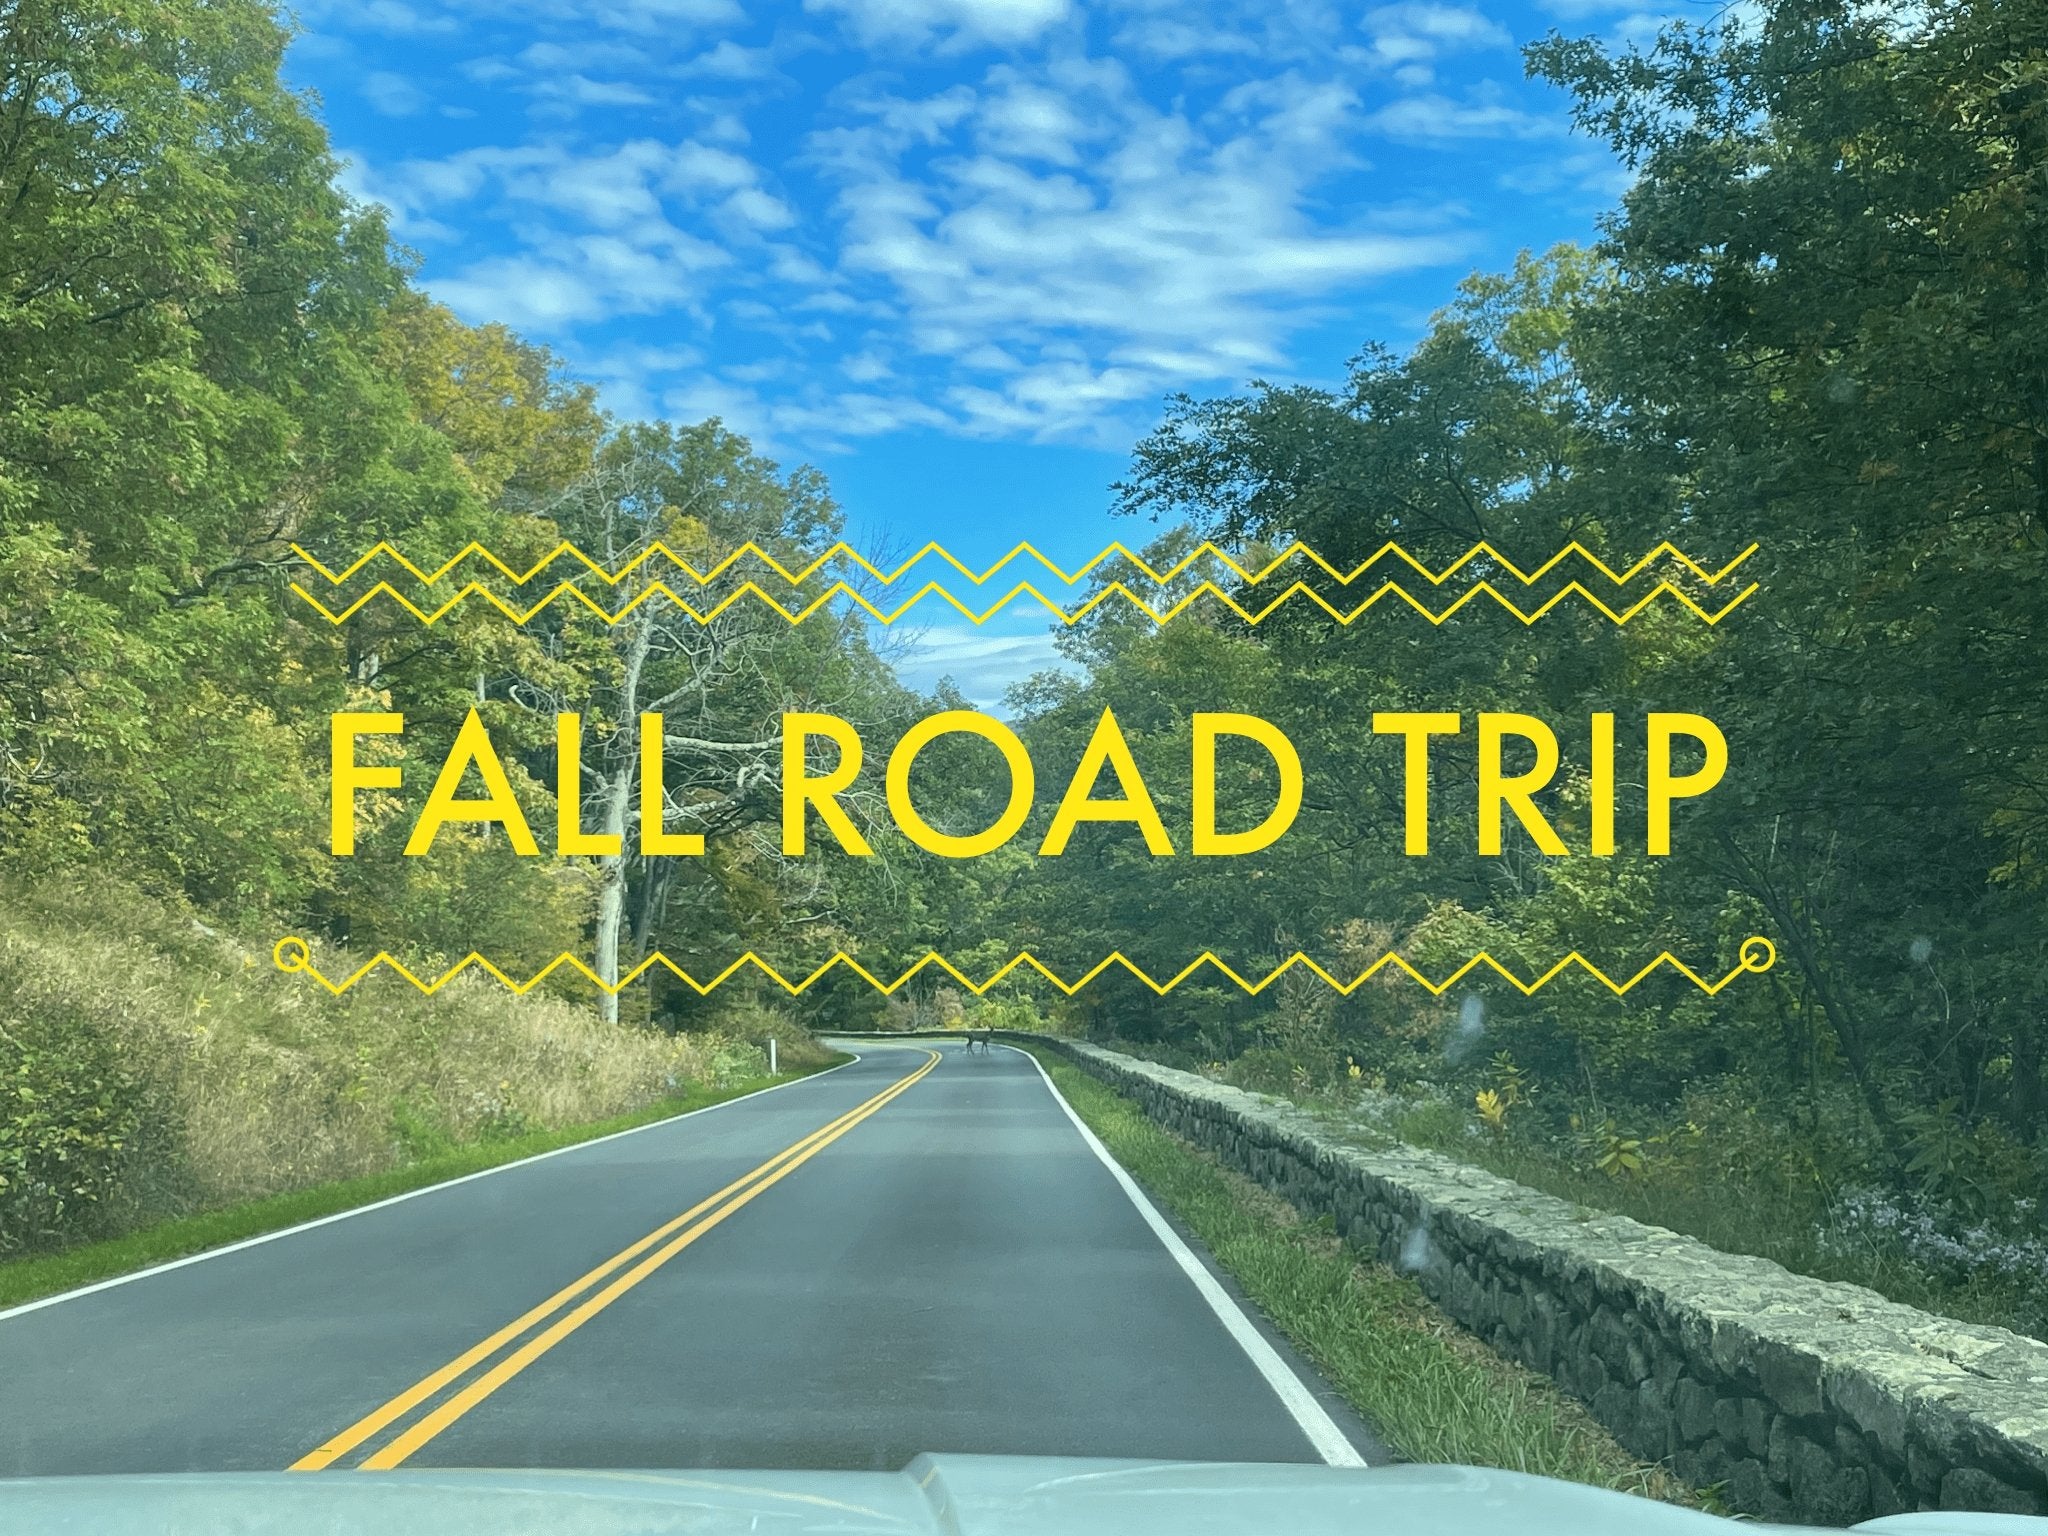 Road Trippin' with the Family - notebooks & honey